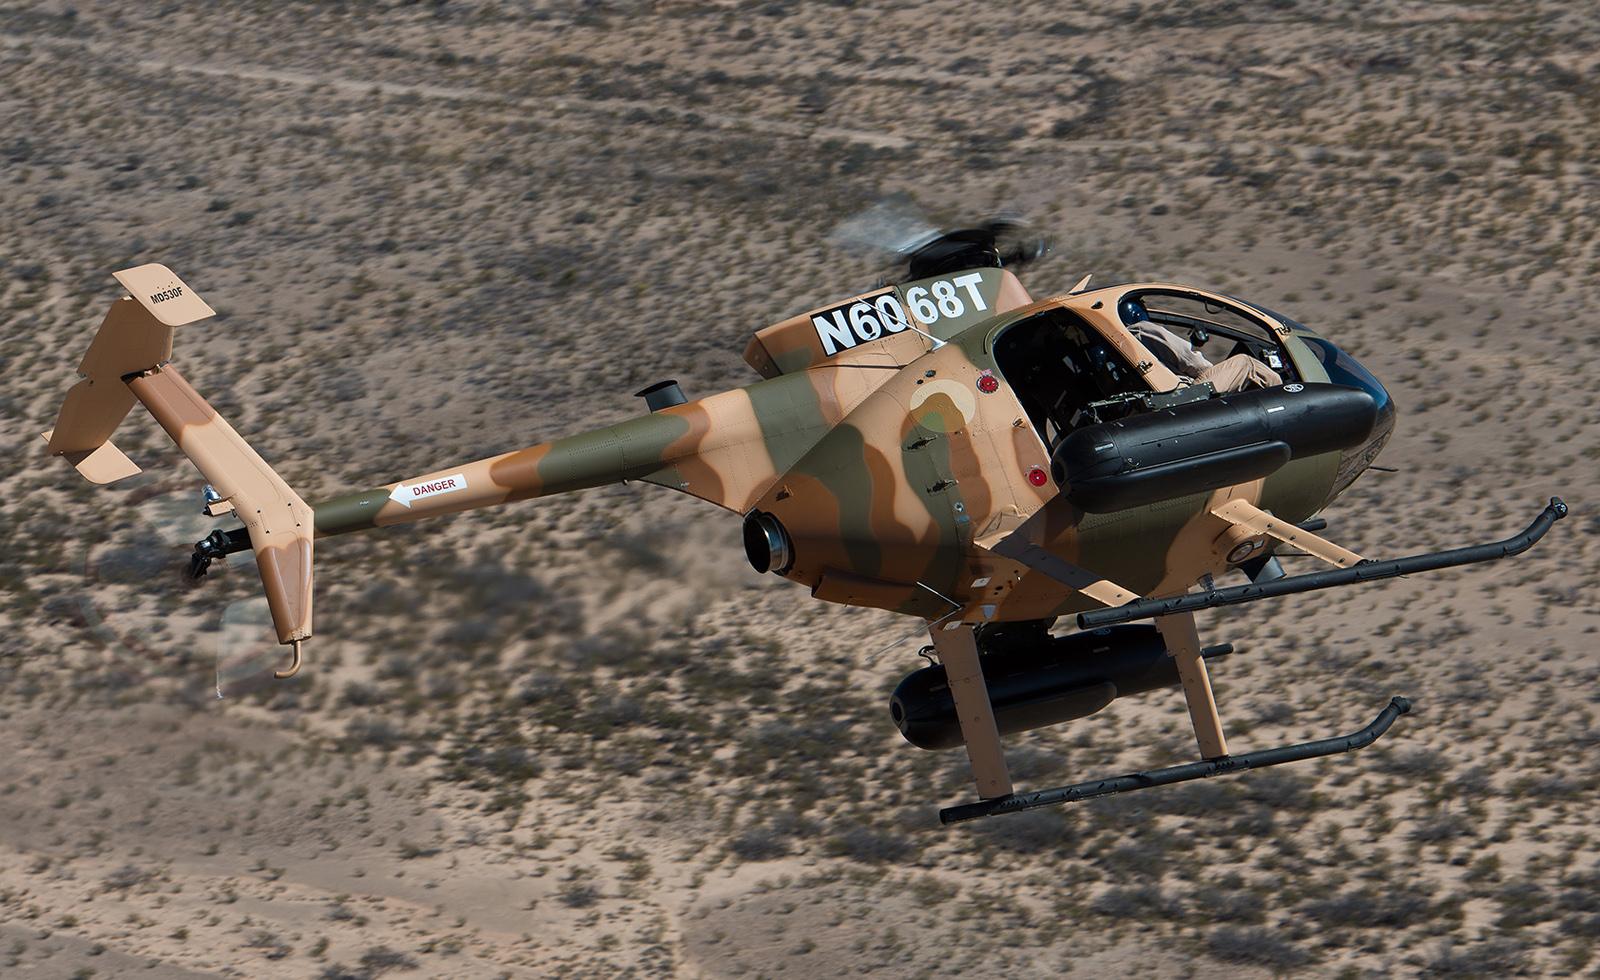 MD 530F Helicopter